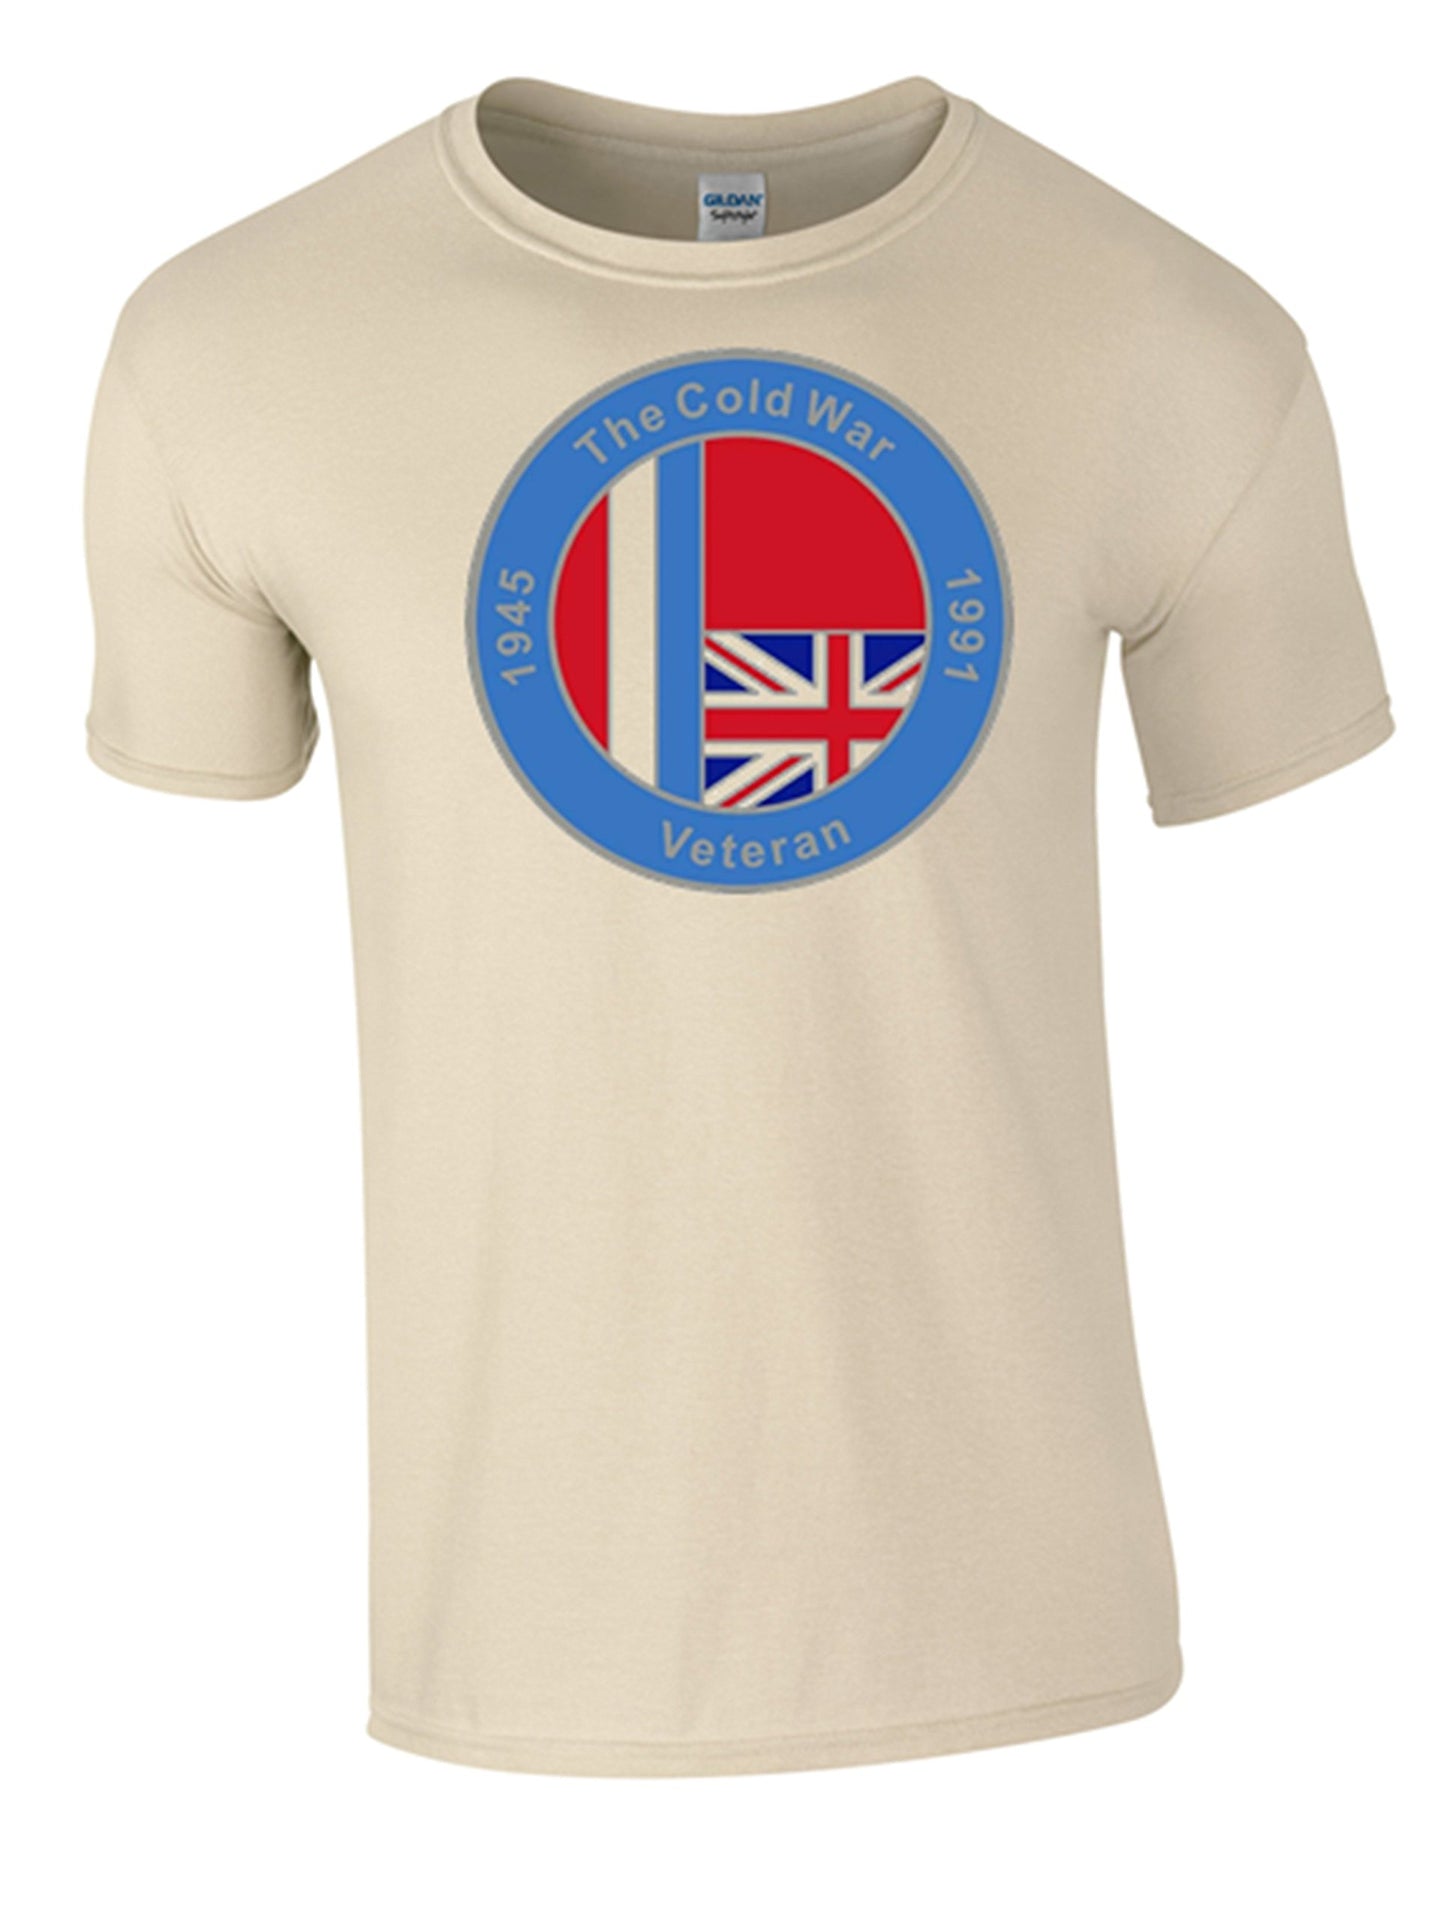 Bear Essentials Clothing. Cold War Op Banner T/Shirt (M, Sand) - Army 1157 kit Army 1157 Kit